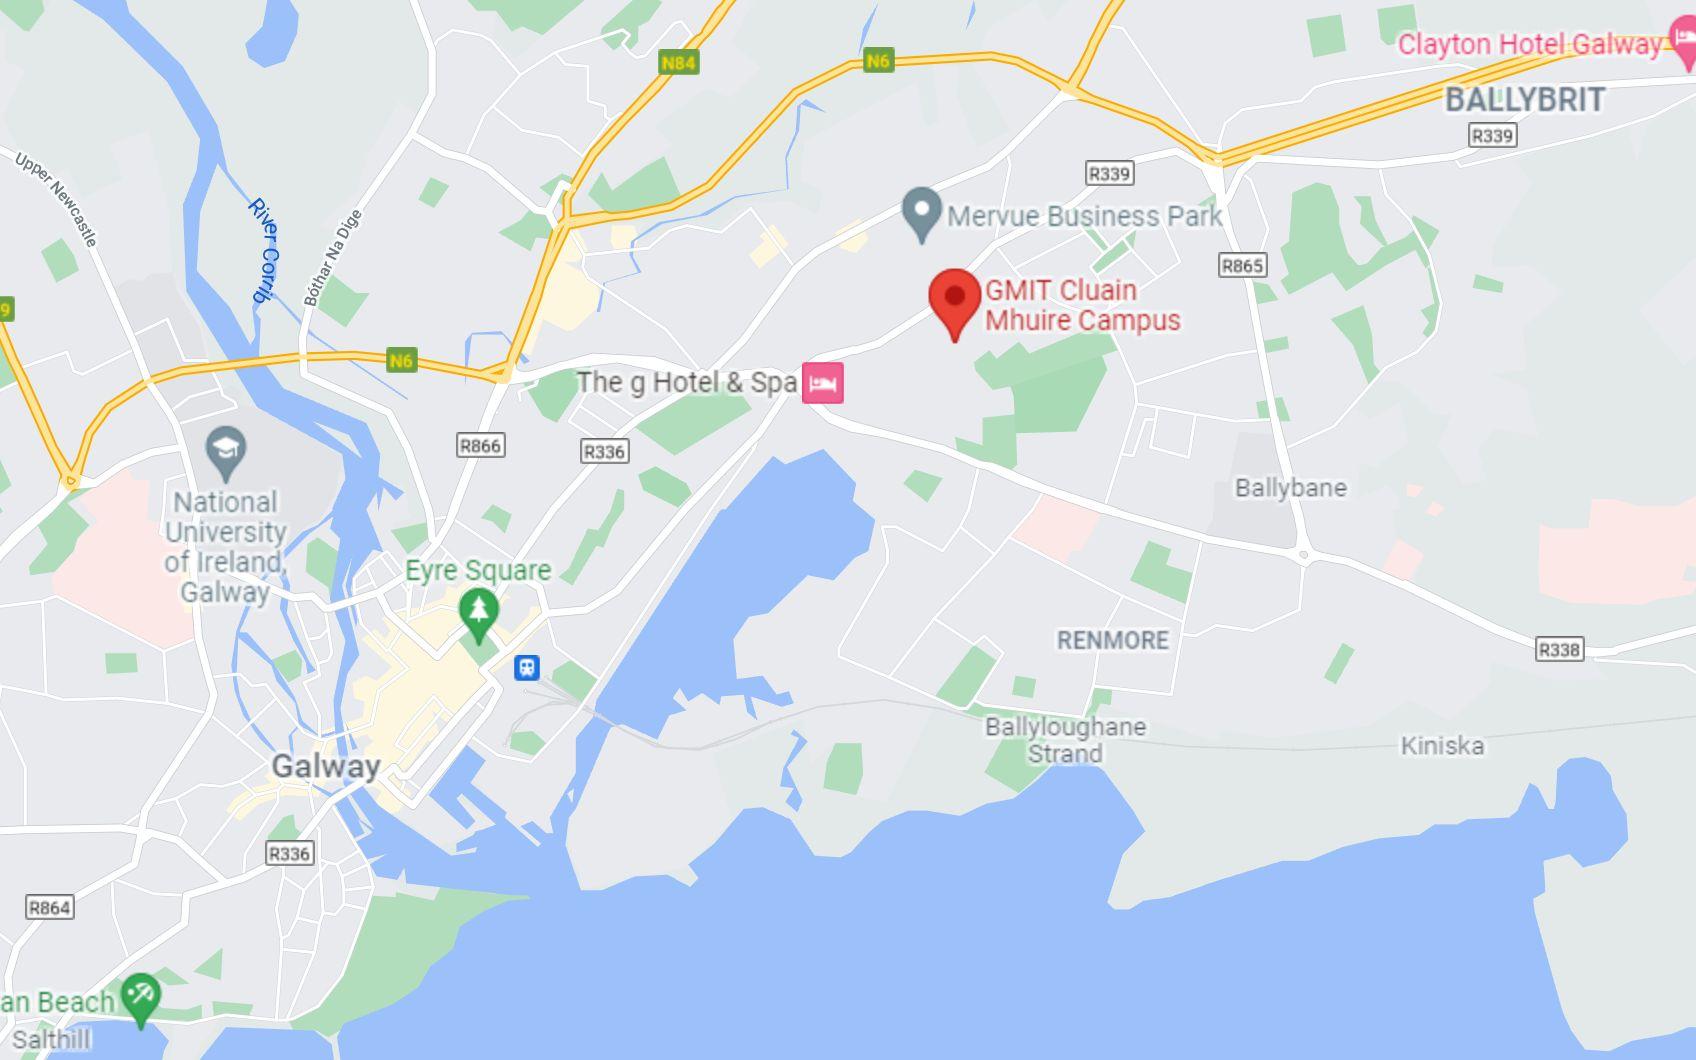 Map of GMIT Cluain Mhuire location